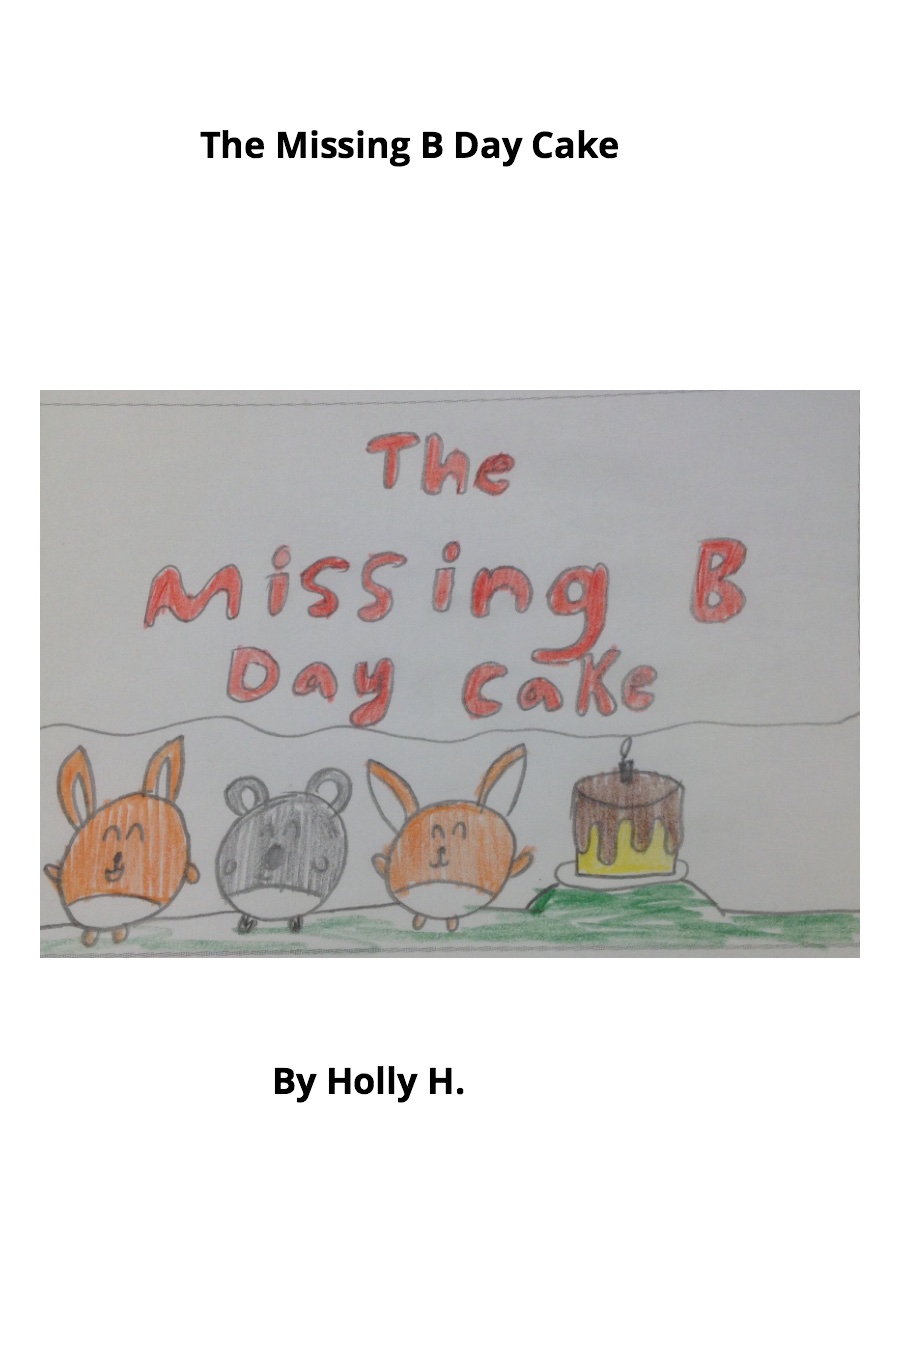 The Missing Birthday Cake by Holly H